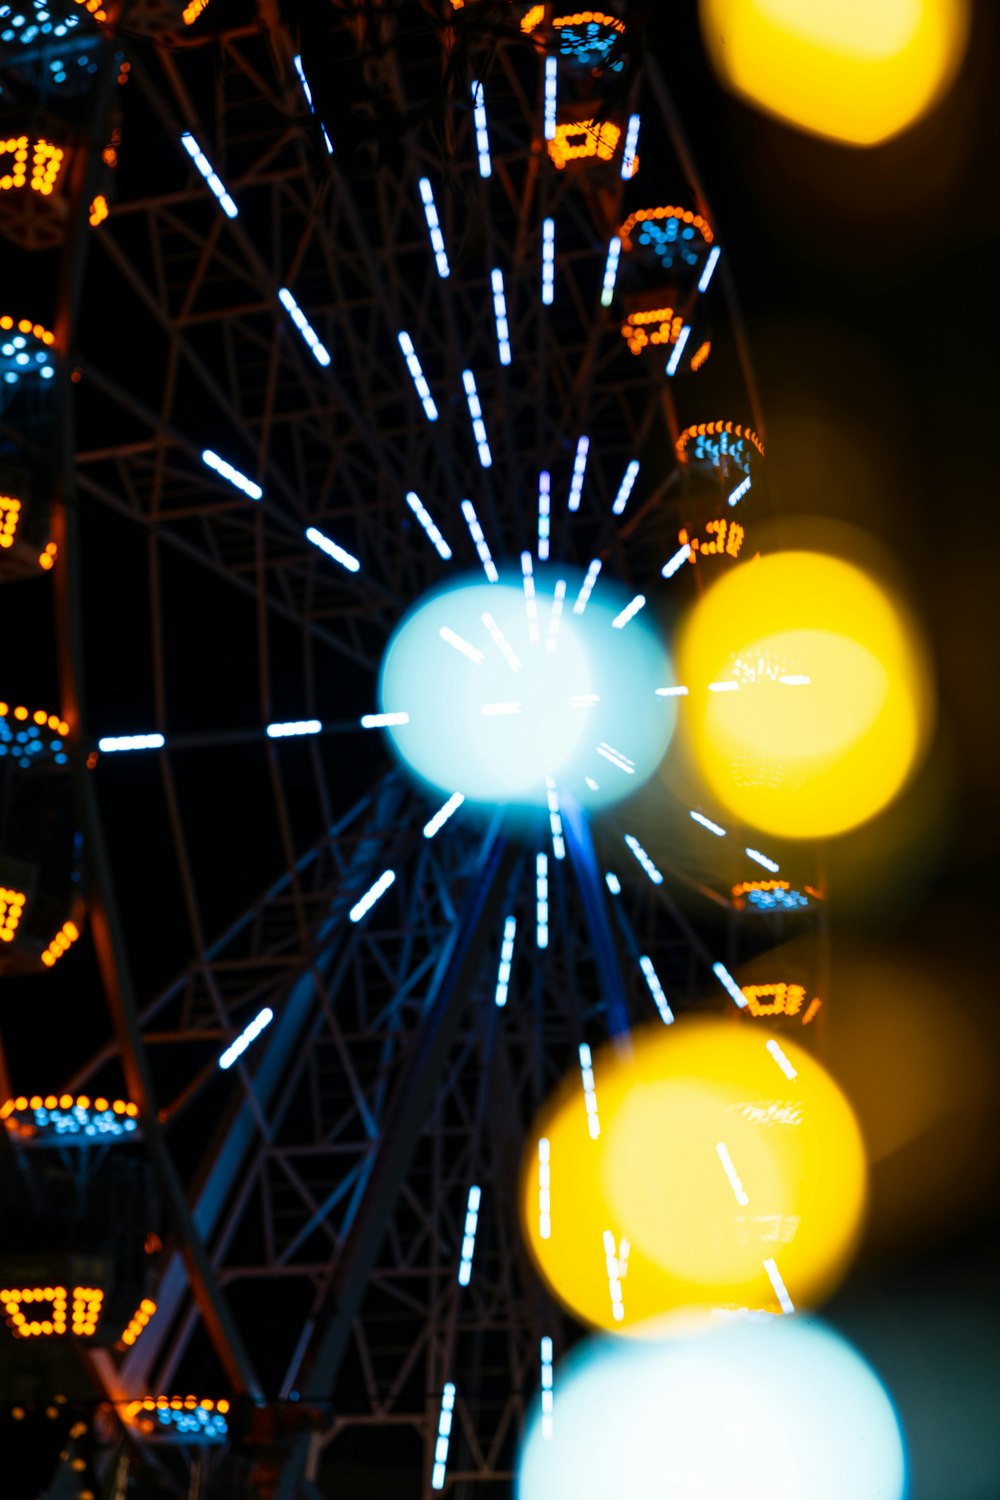 a ferris wheel lit up at night time